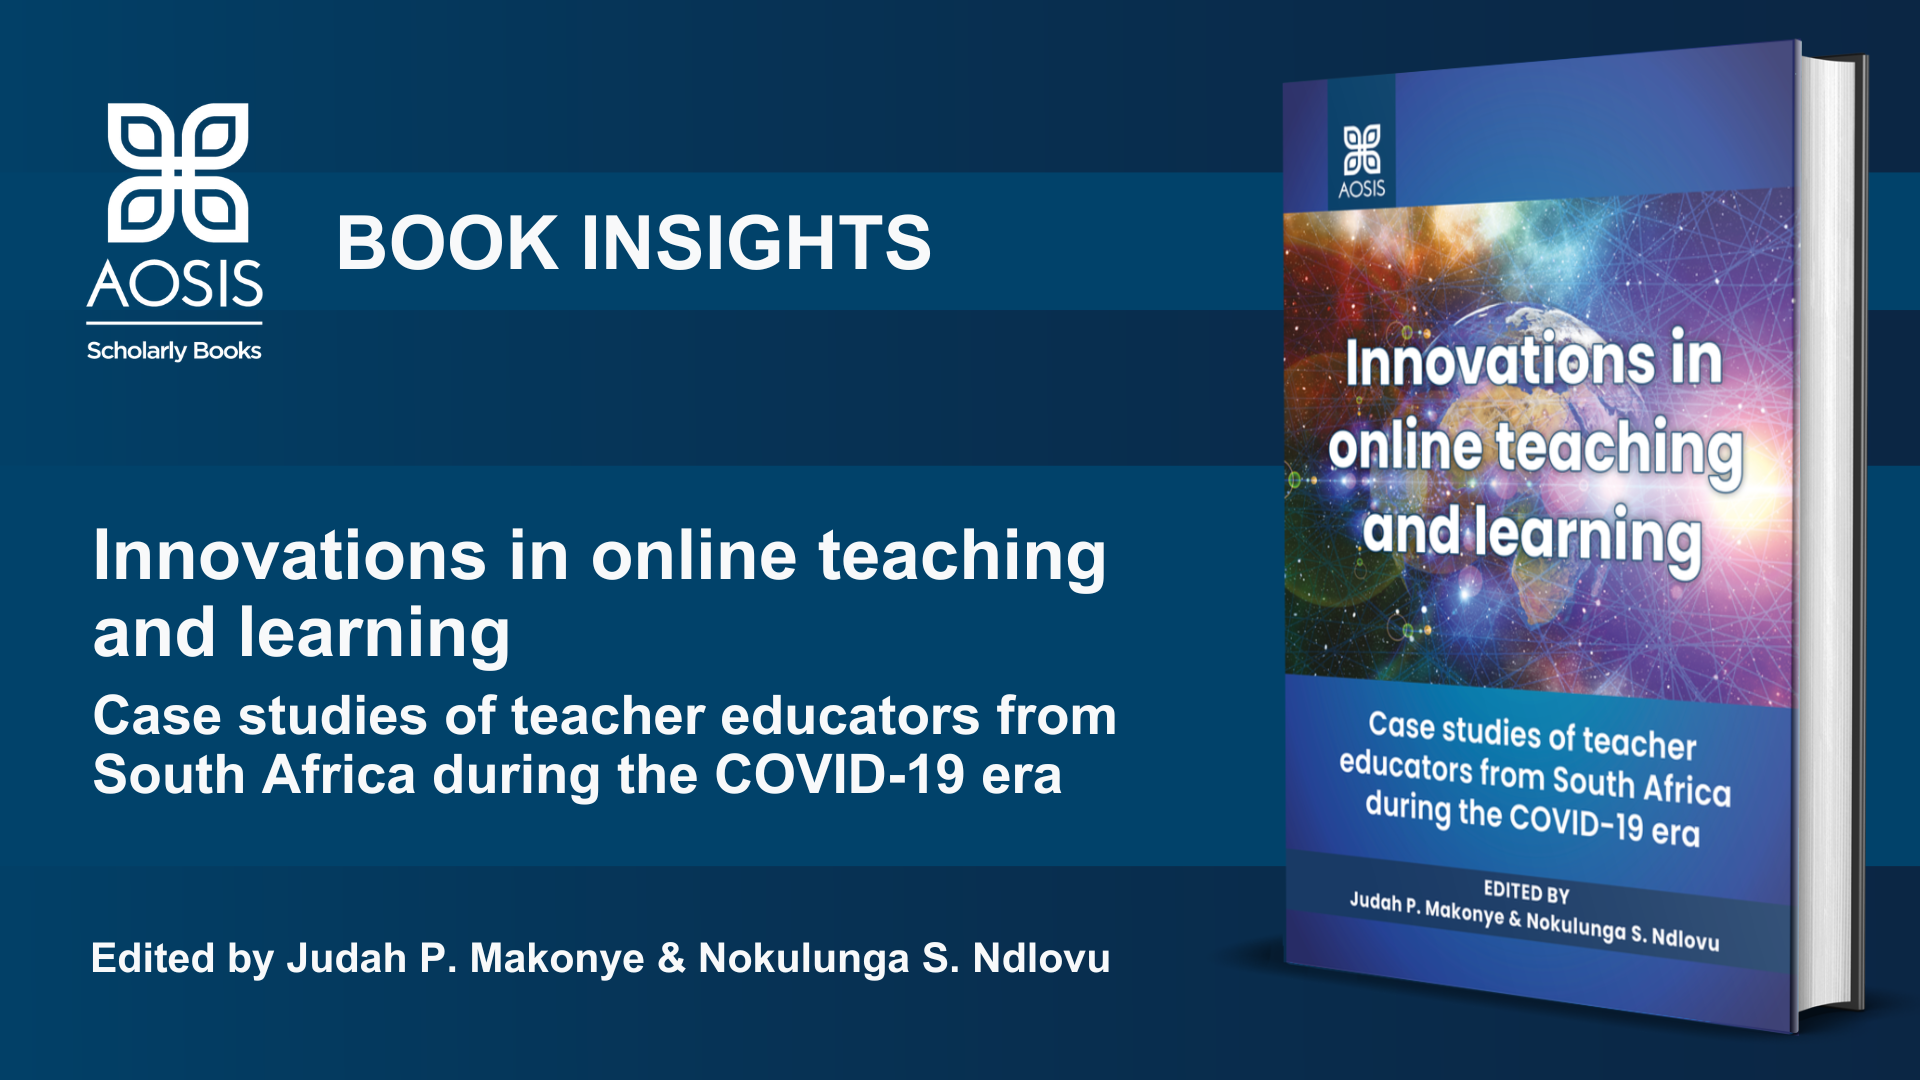 AOSIS Books publishes ‘Innovations in online teaching and learning’